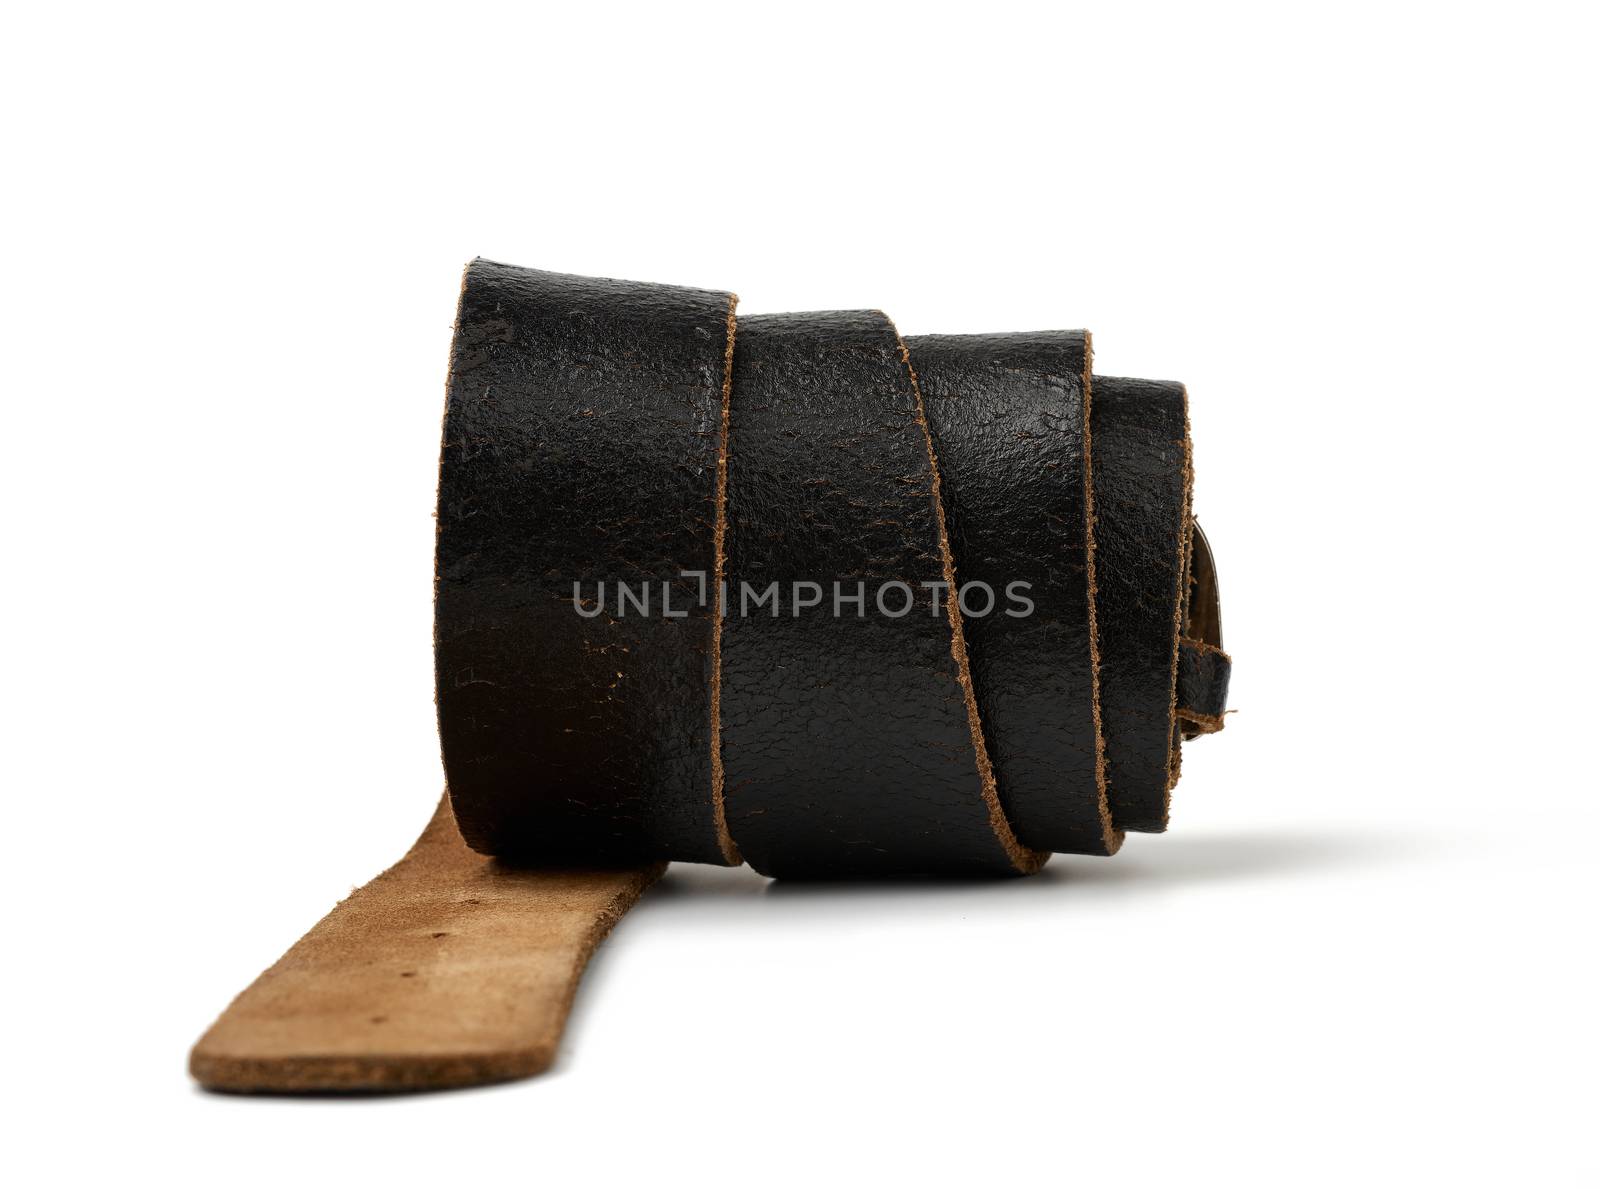 twisted brown leather vintage belt with metal buckle isolated on white background, close up